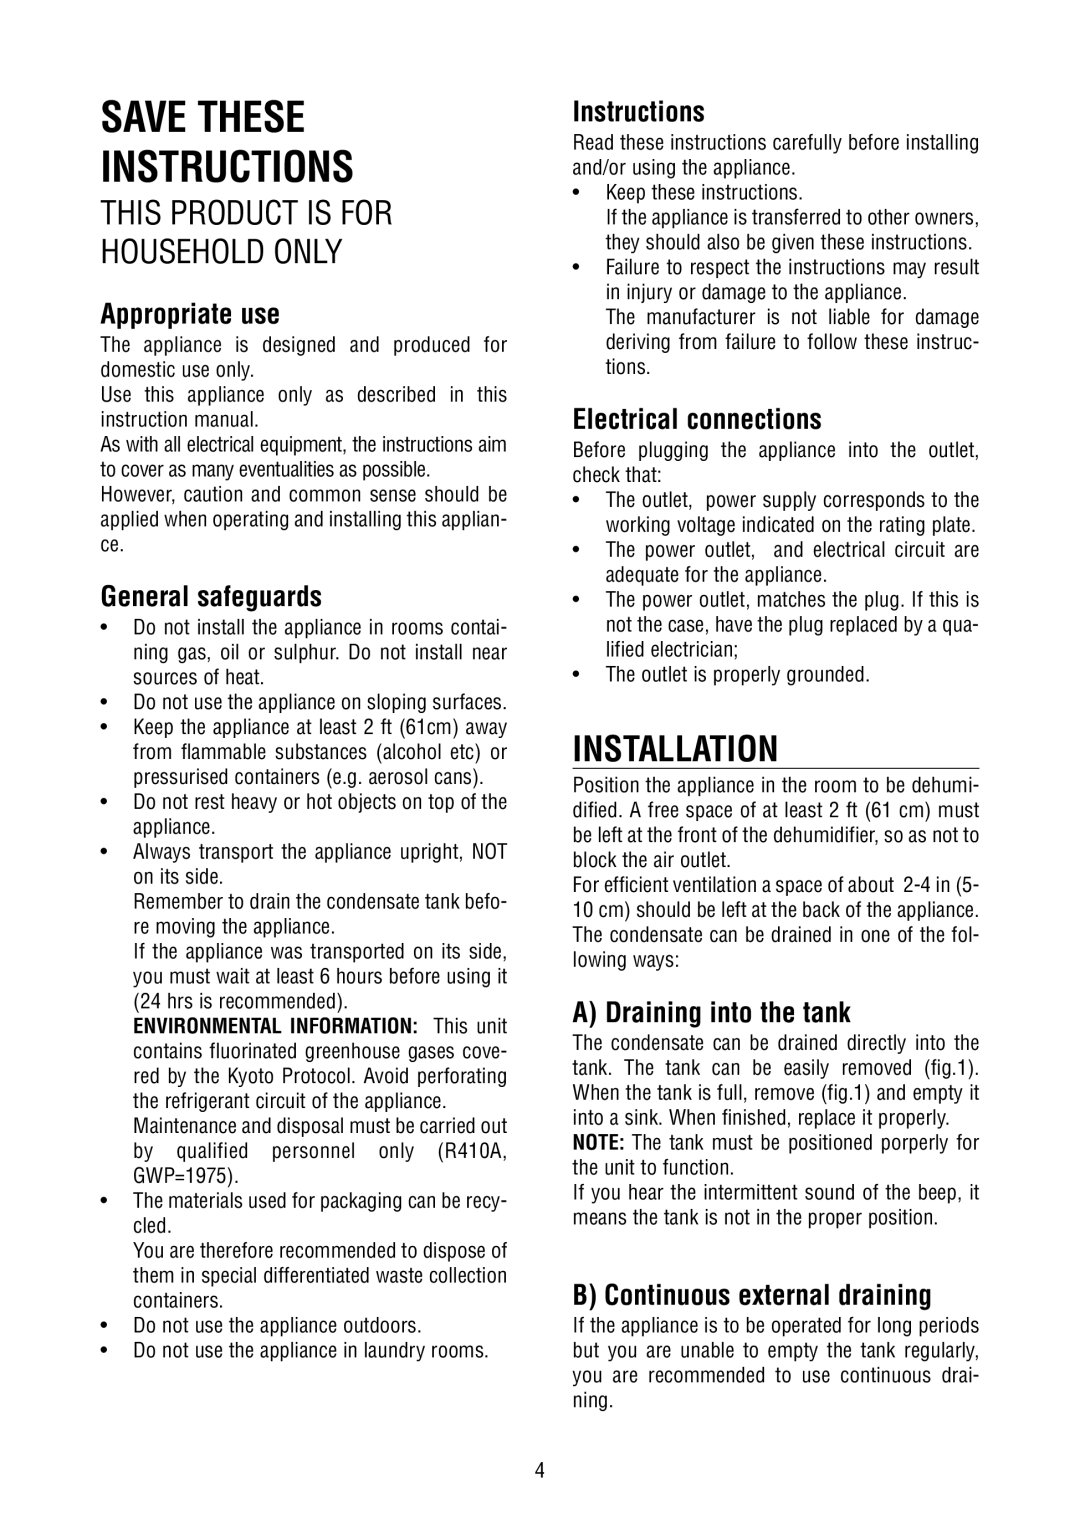 DeLonghi DD40P, DD45P Save These Instructions, Installation, Appropriate use, General safeguards, Electrical connections 